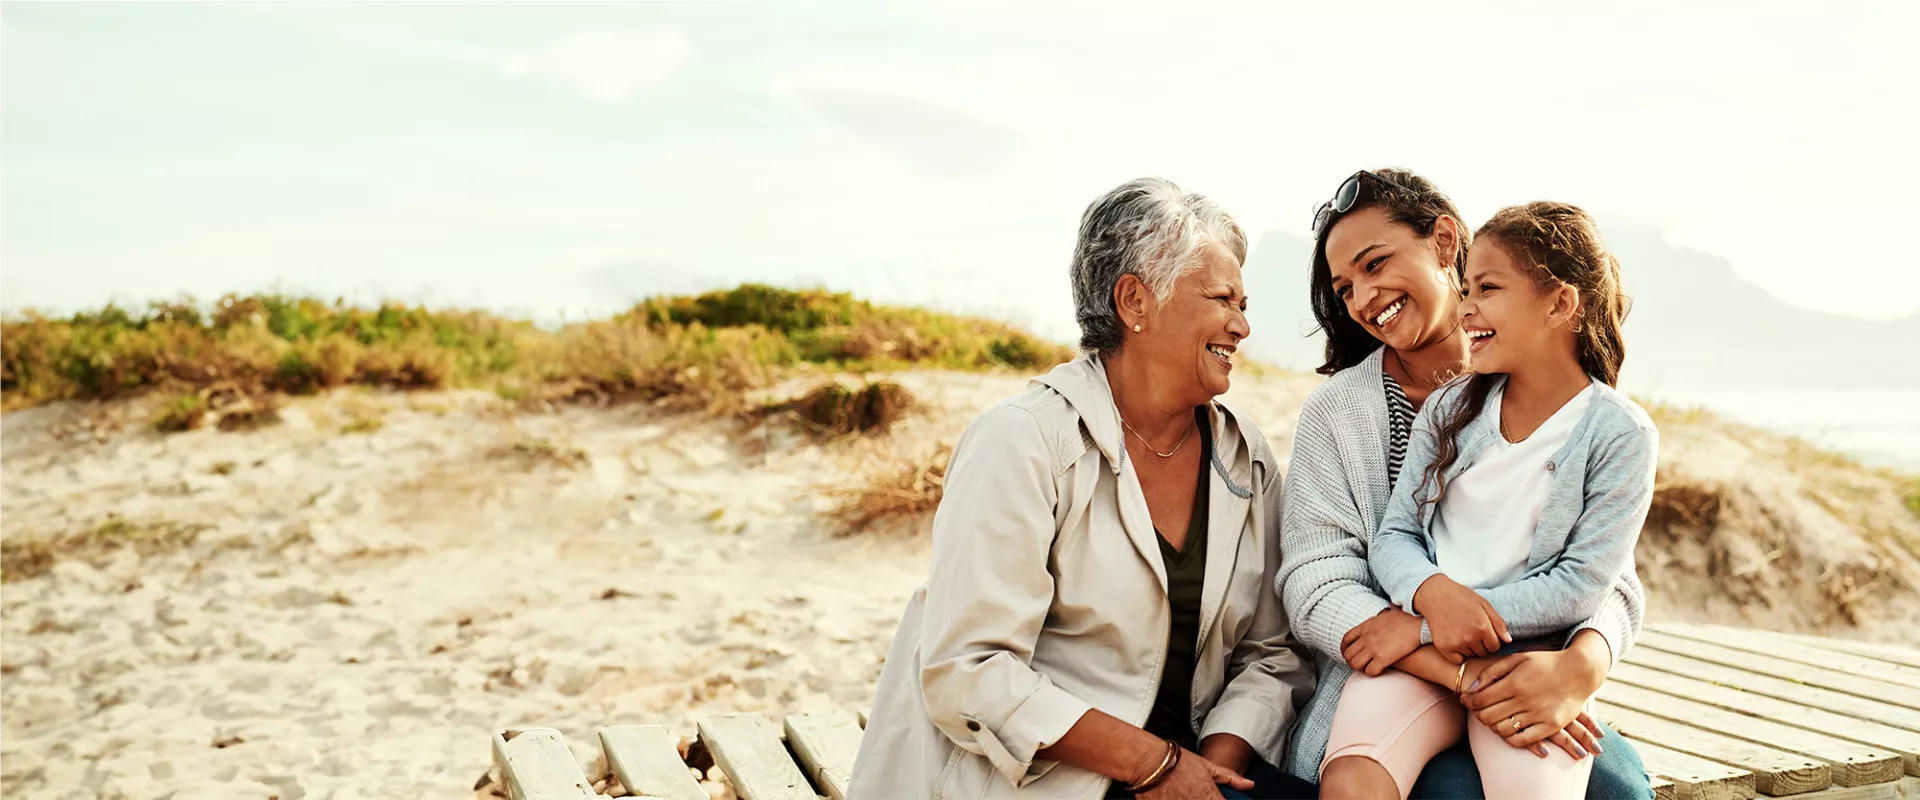 Grandmother，mother and daughter smiling and laughing on a beach